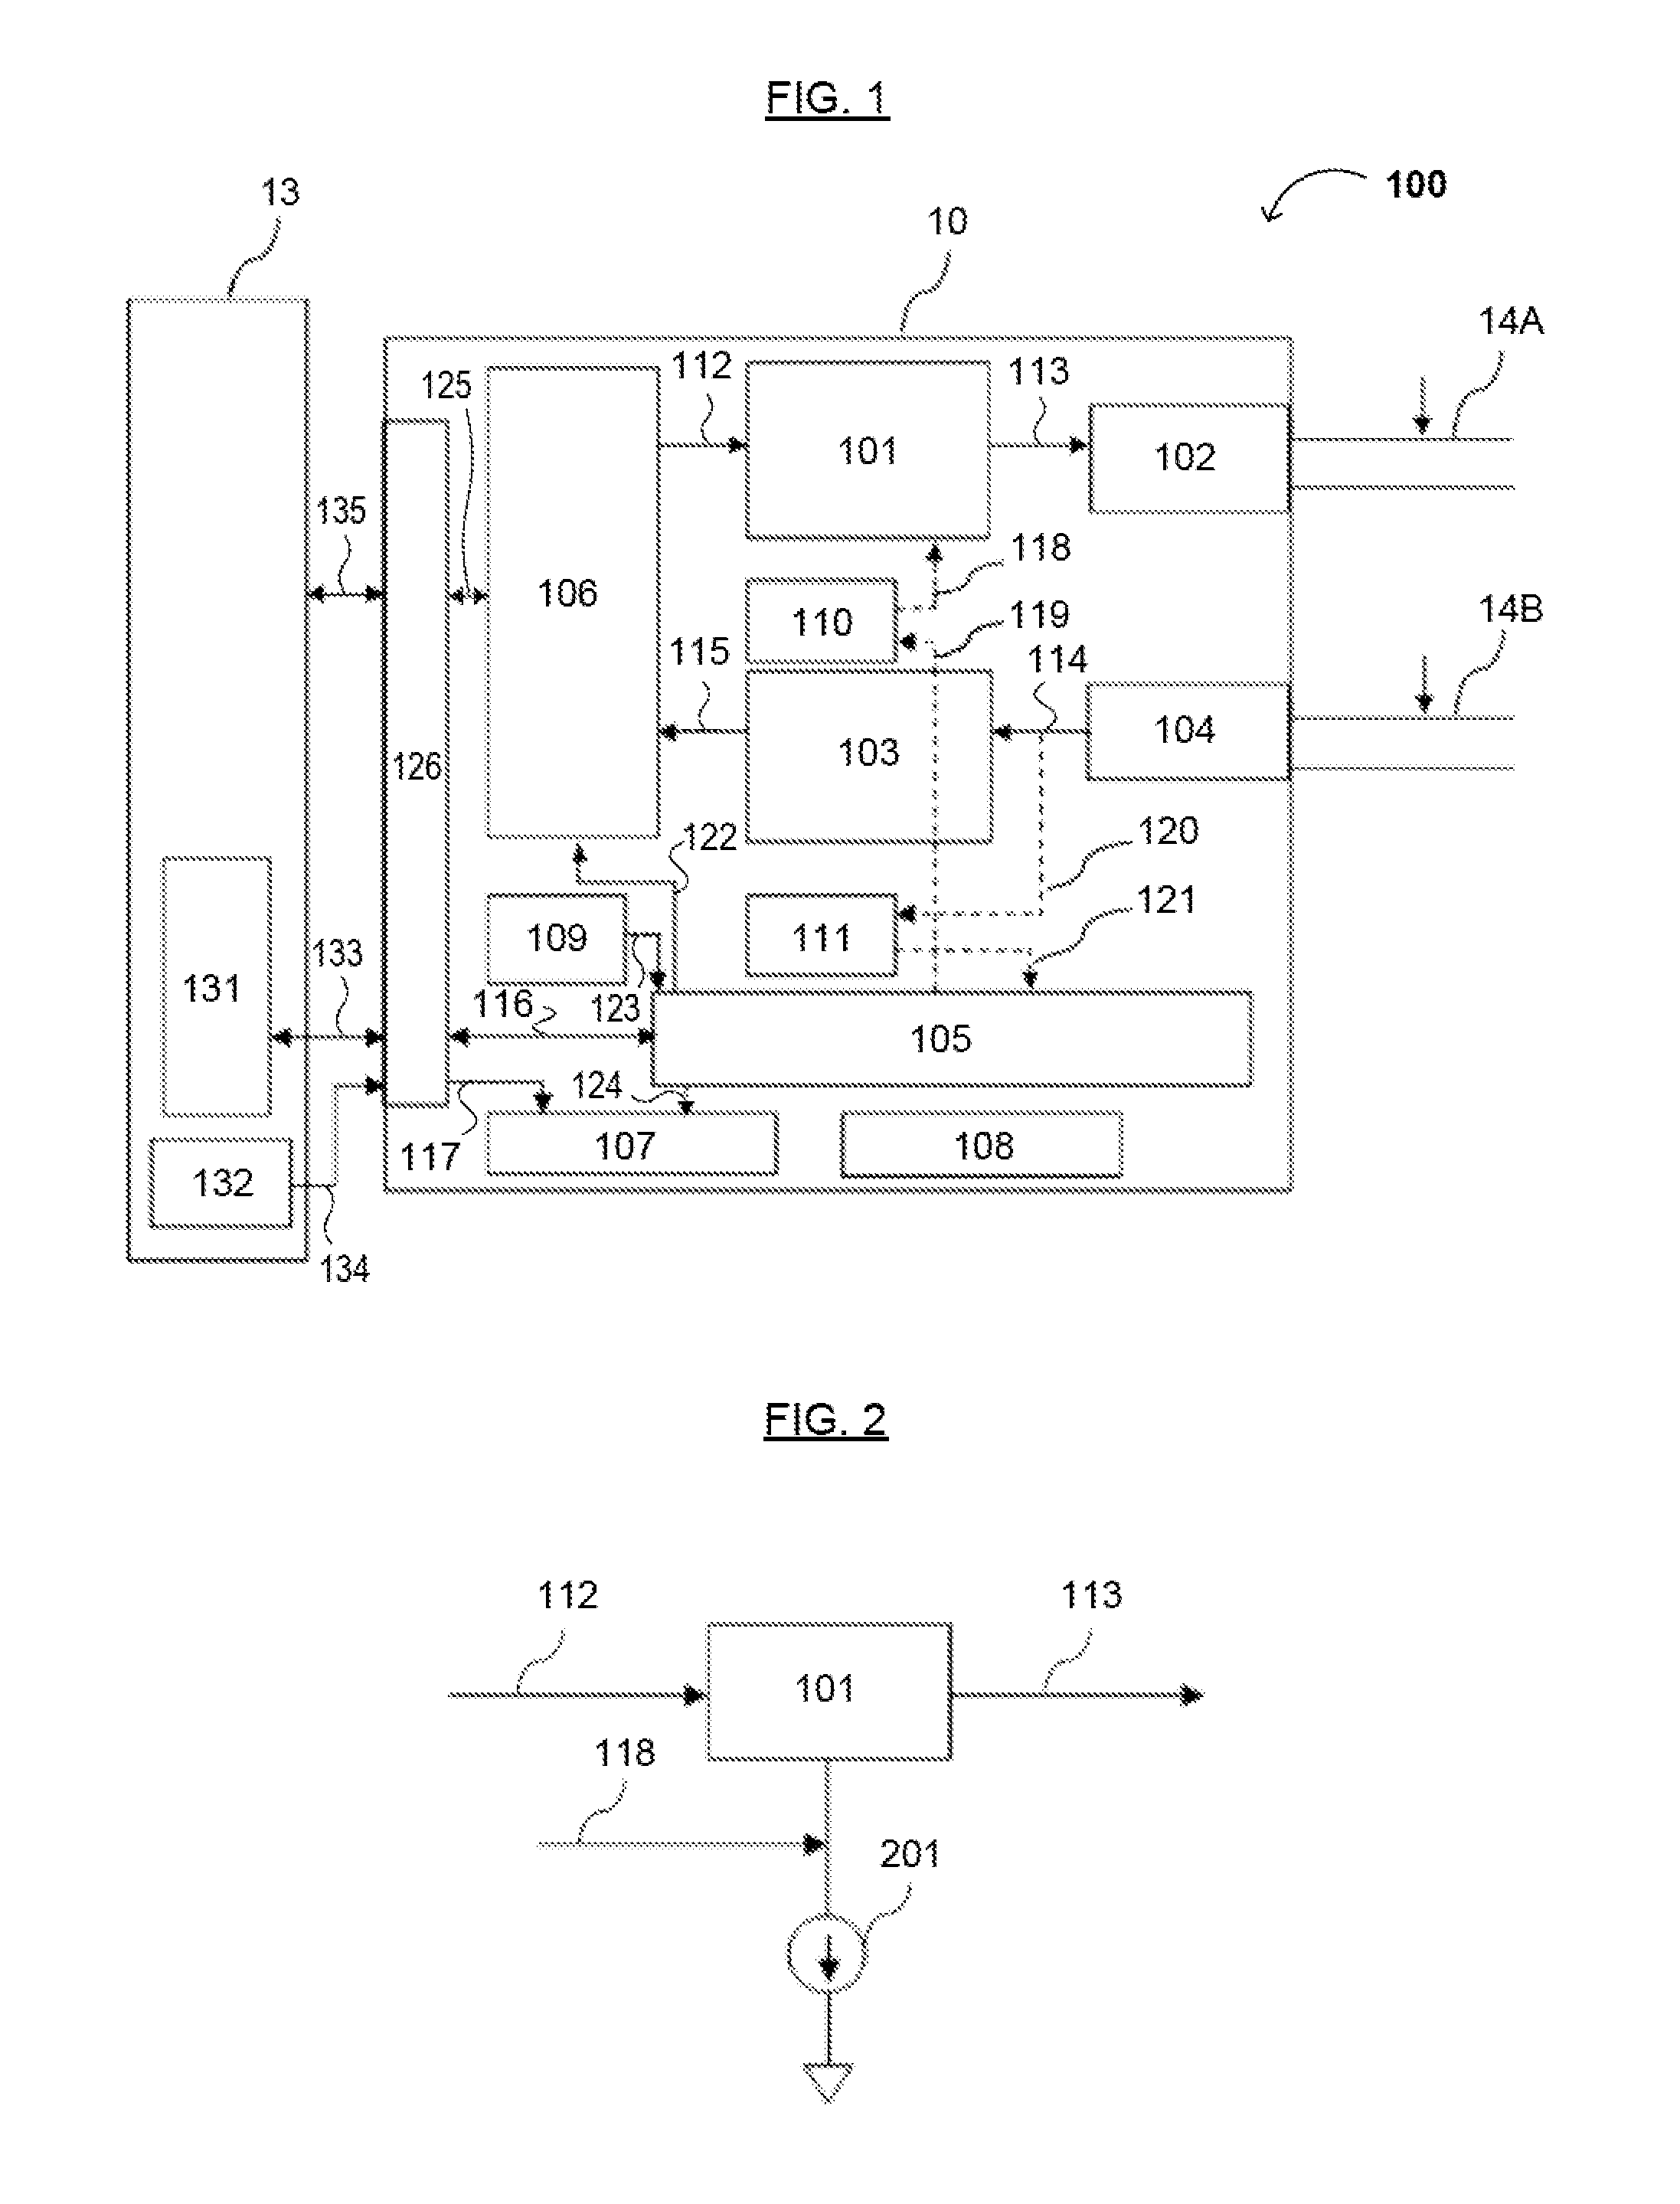 Circuits, Architectures, Apparatuses, Systems, and Methods for Merging of Management and Data Signals, and for Recovery of a Management Signal